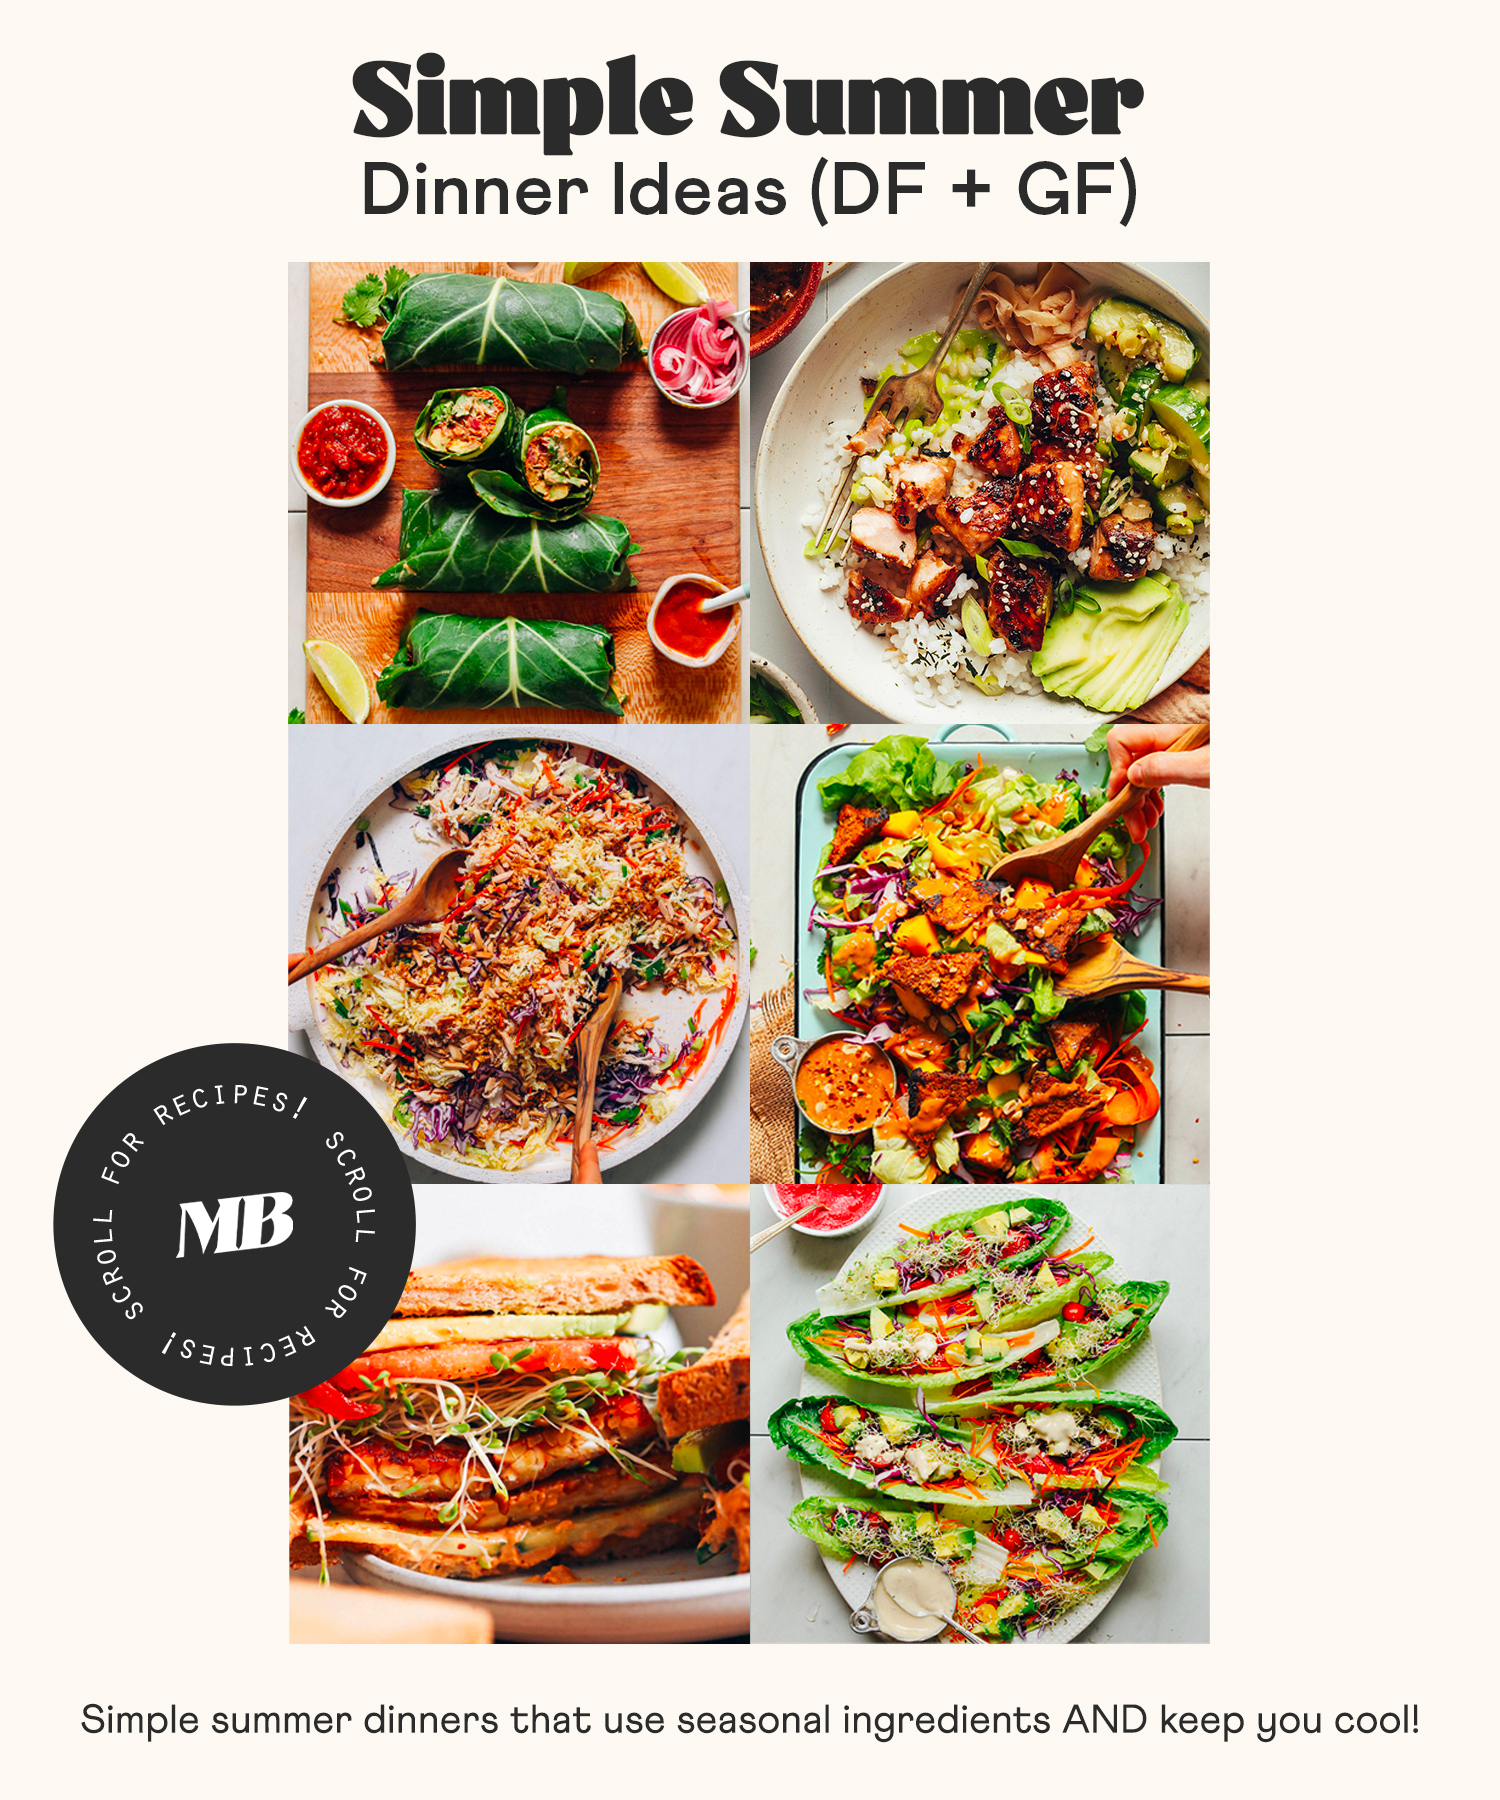 Photos of simple summer dinner ideas that are gluten-free and dairy-free